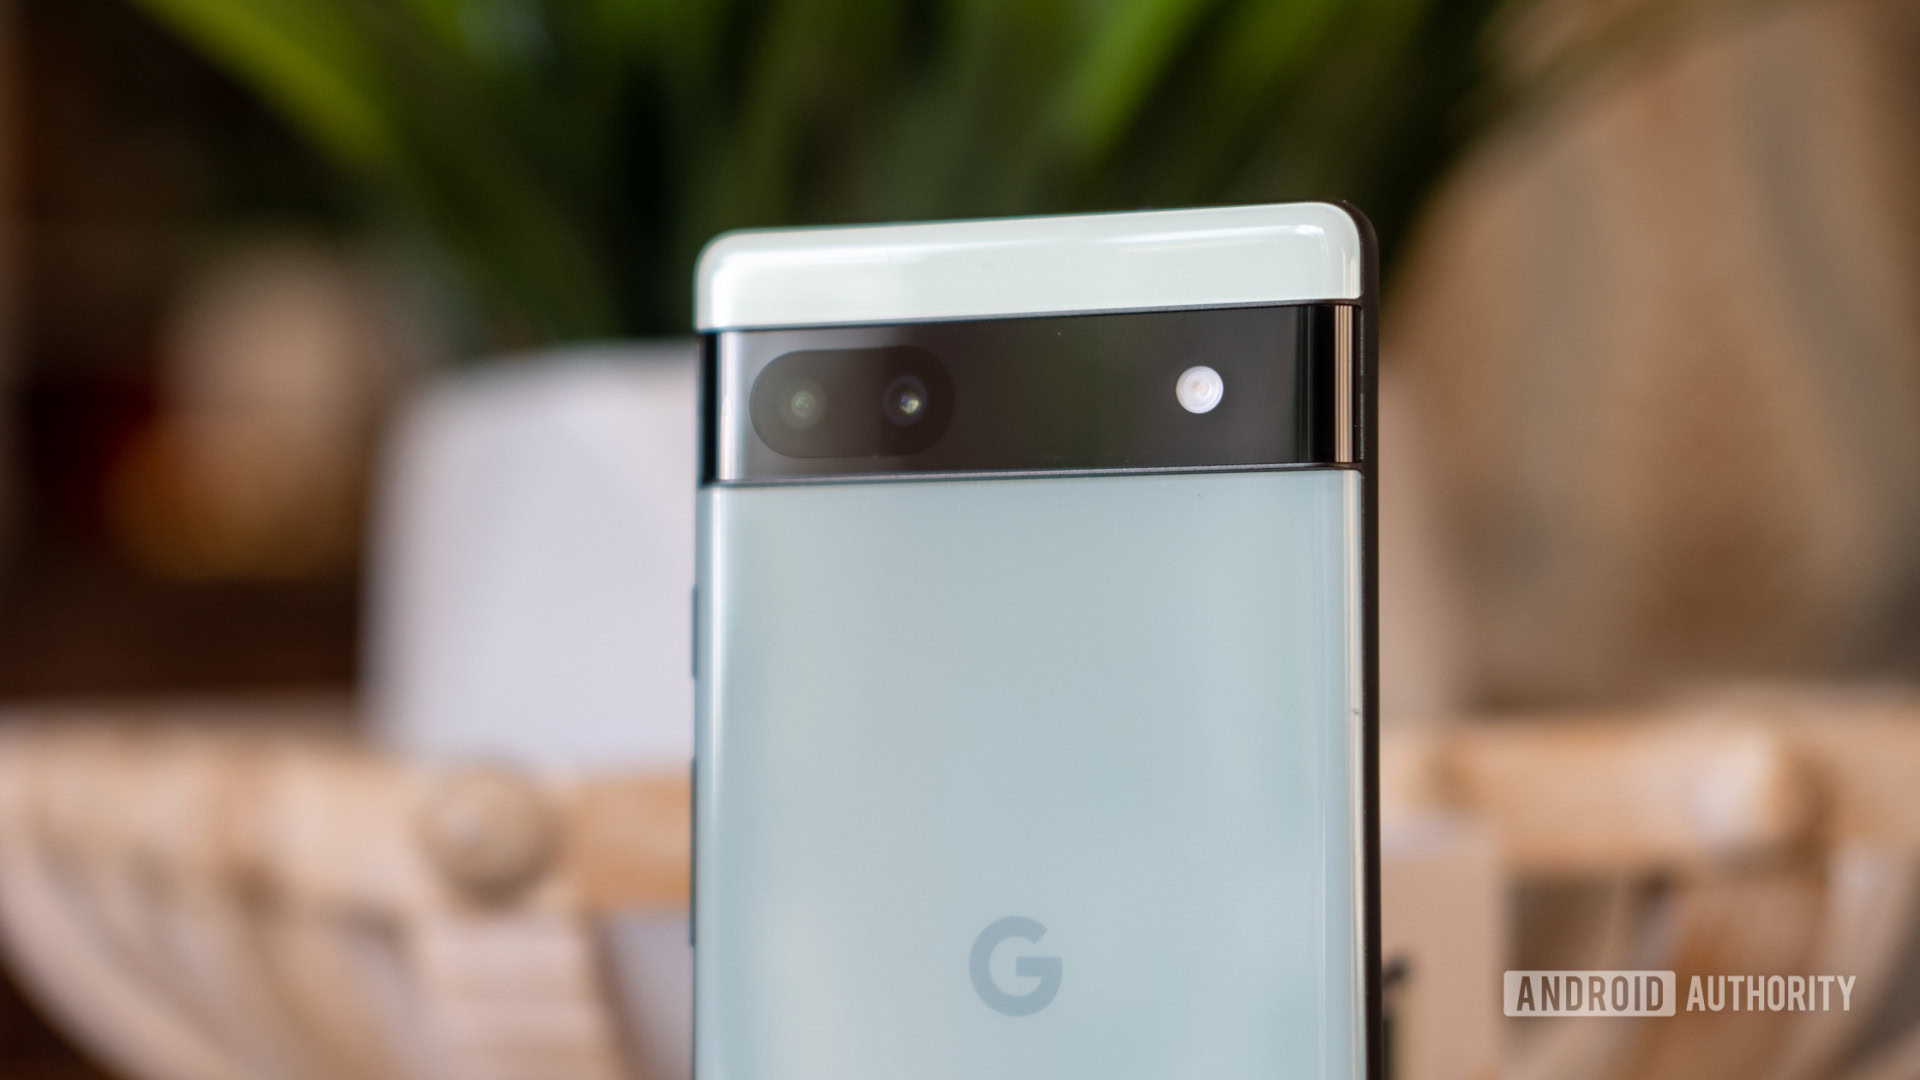 Google Pixel 6a buyer's guide: What you need to know